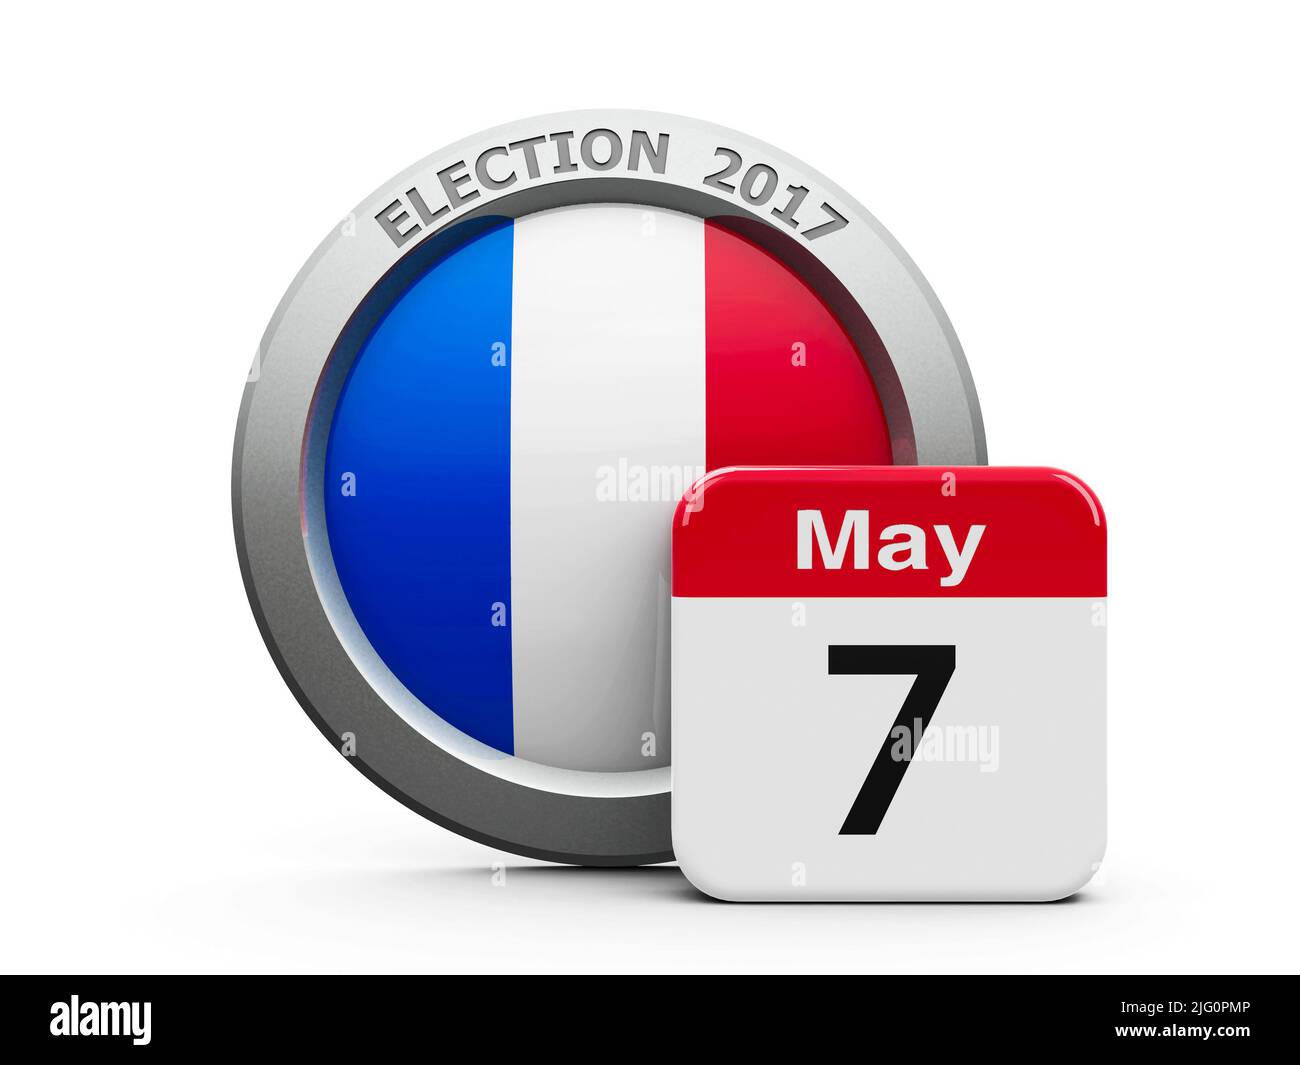 Emblem of France with calendar button - The Seventh of May - represents the Election Day 2017 in France, three-dimensional rendering, 3D illustration Stock Photo